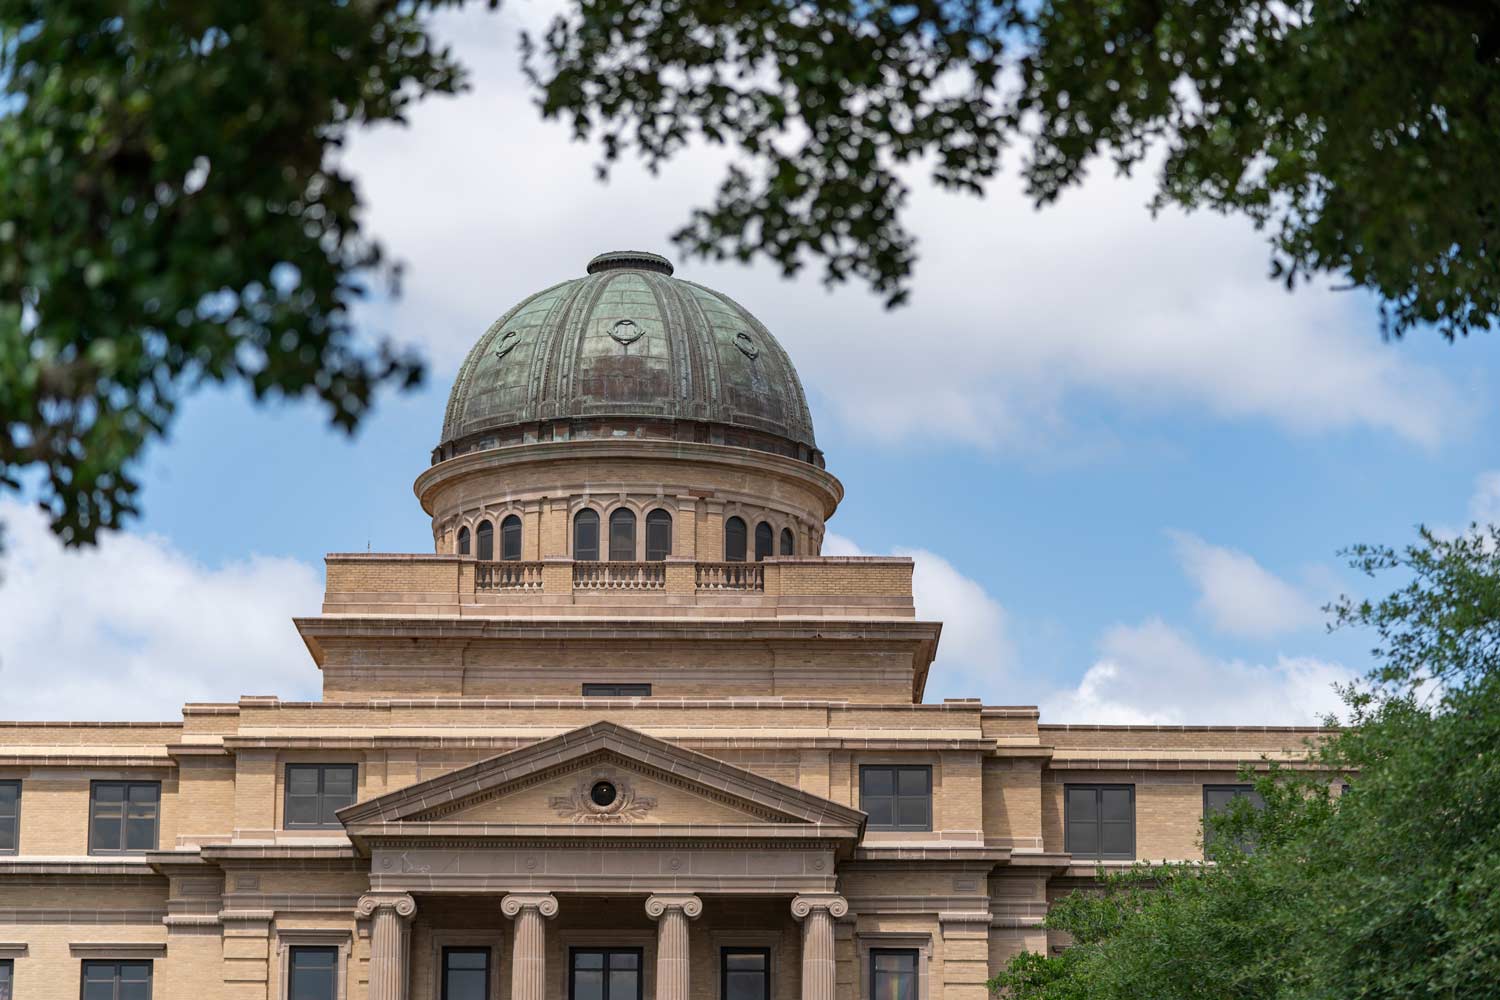 The dome of the Academic Building at the center of Texas A&M Campus